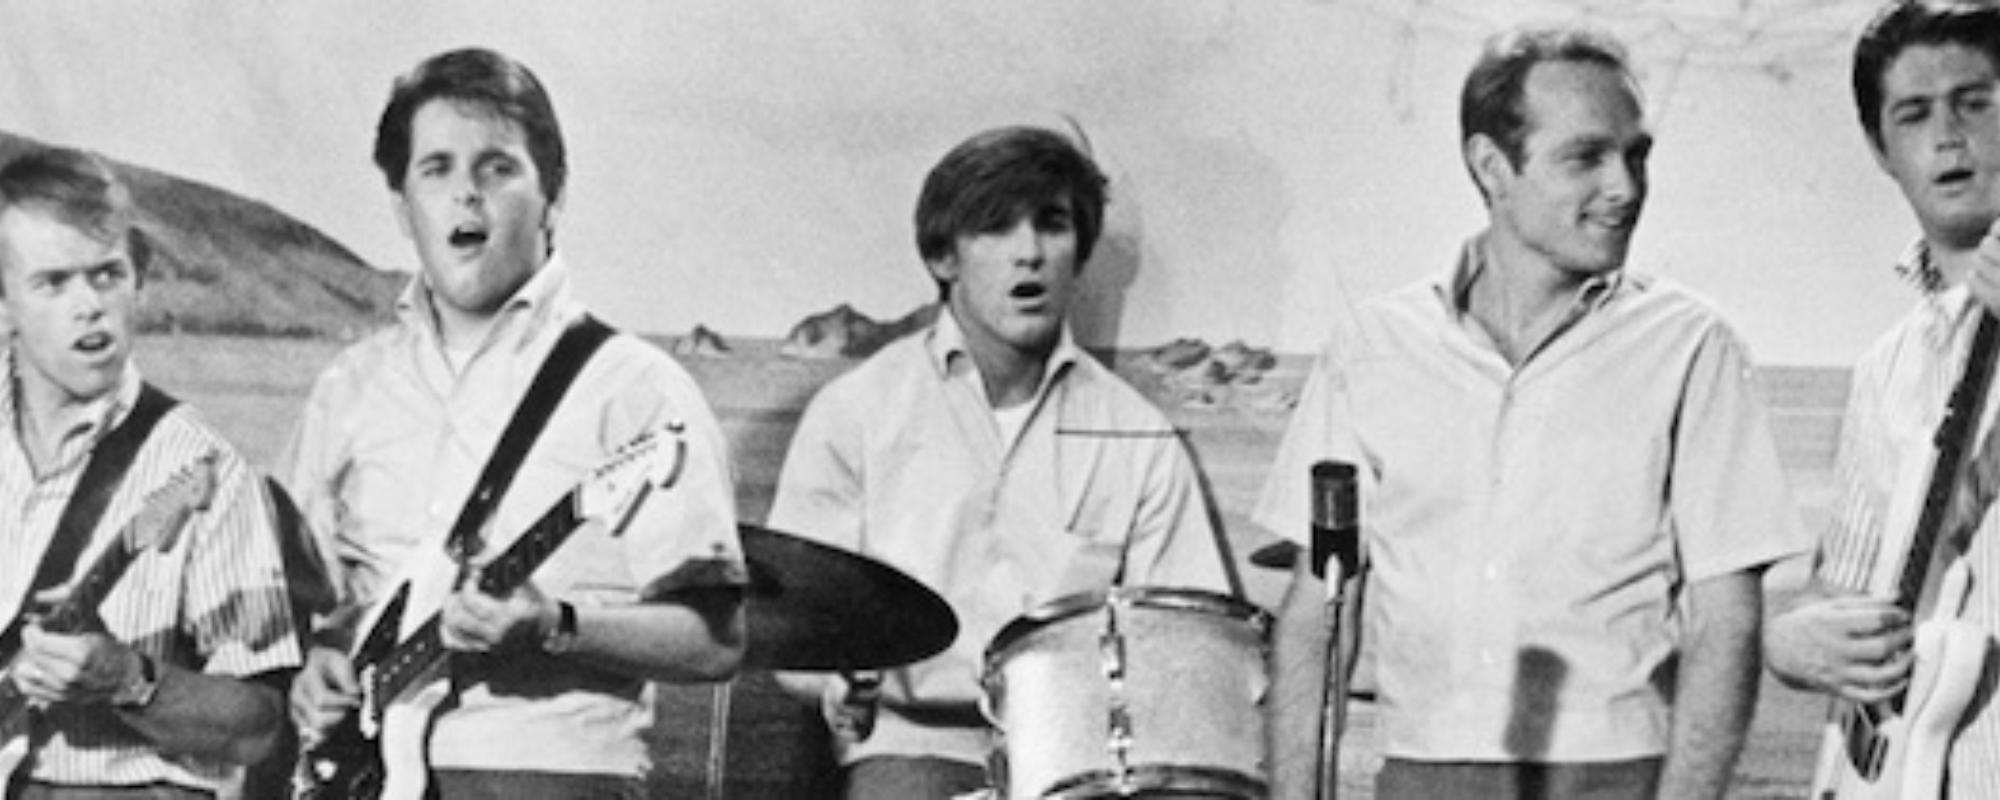 3 Movies Every Beach Boys Fan Should See